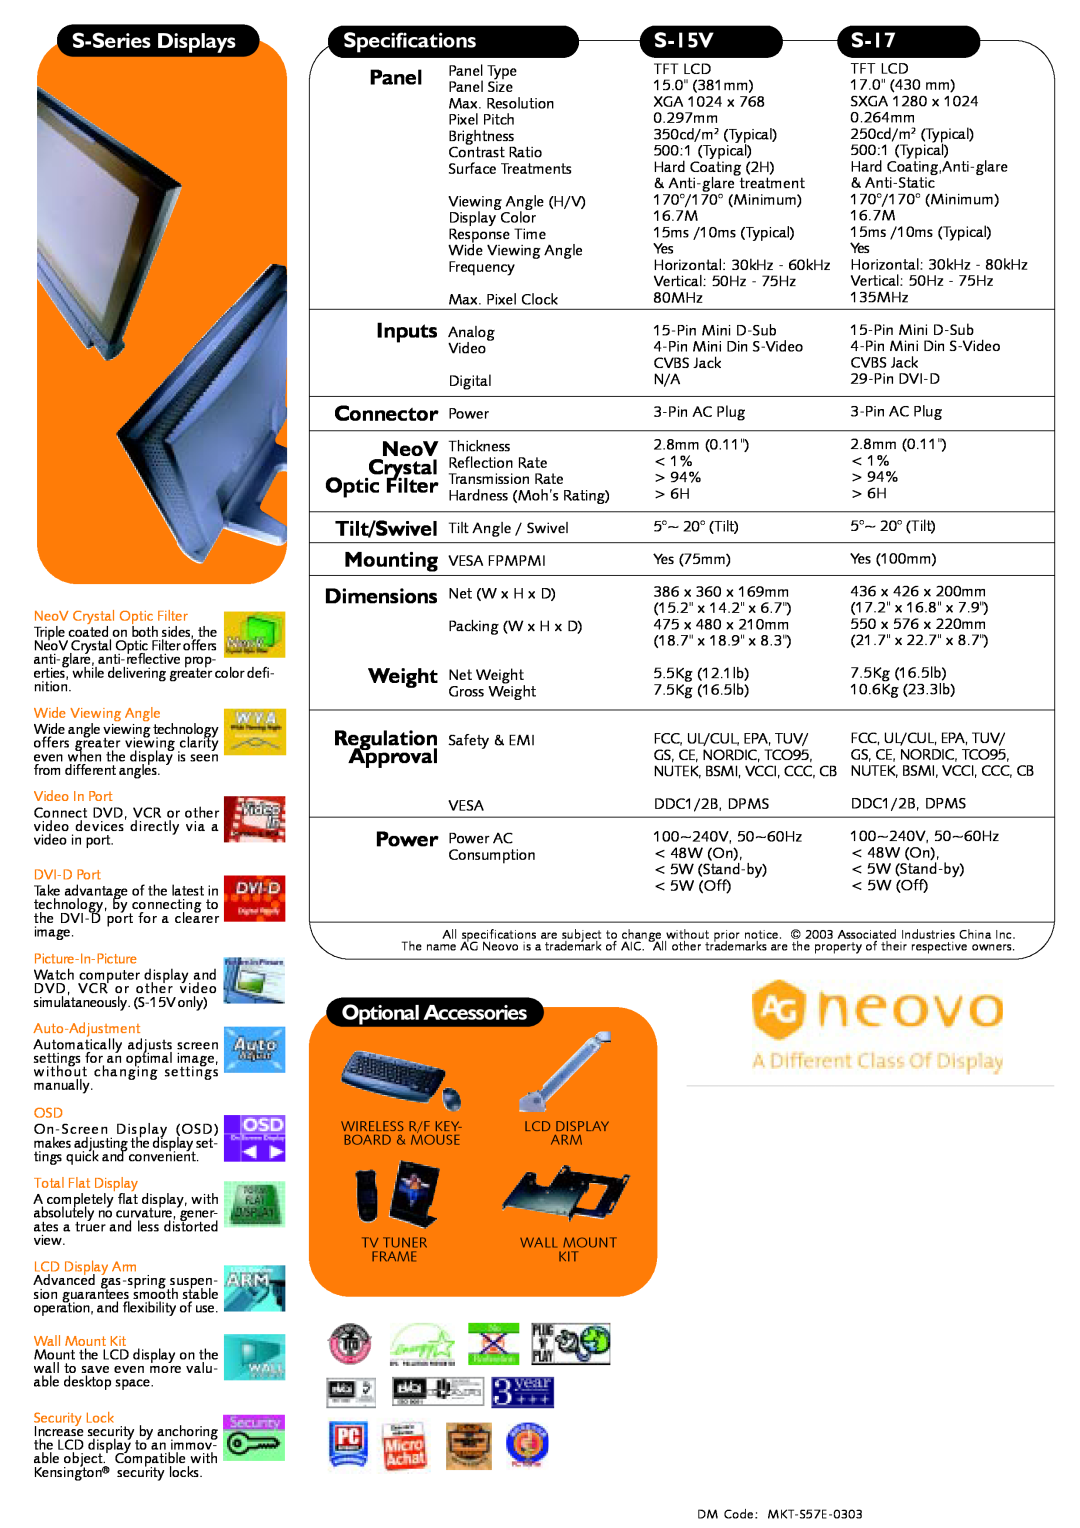 AG Neovo S-17 manual S-Series Displays, Specifications, S-15V, Optional Accessories 